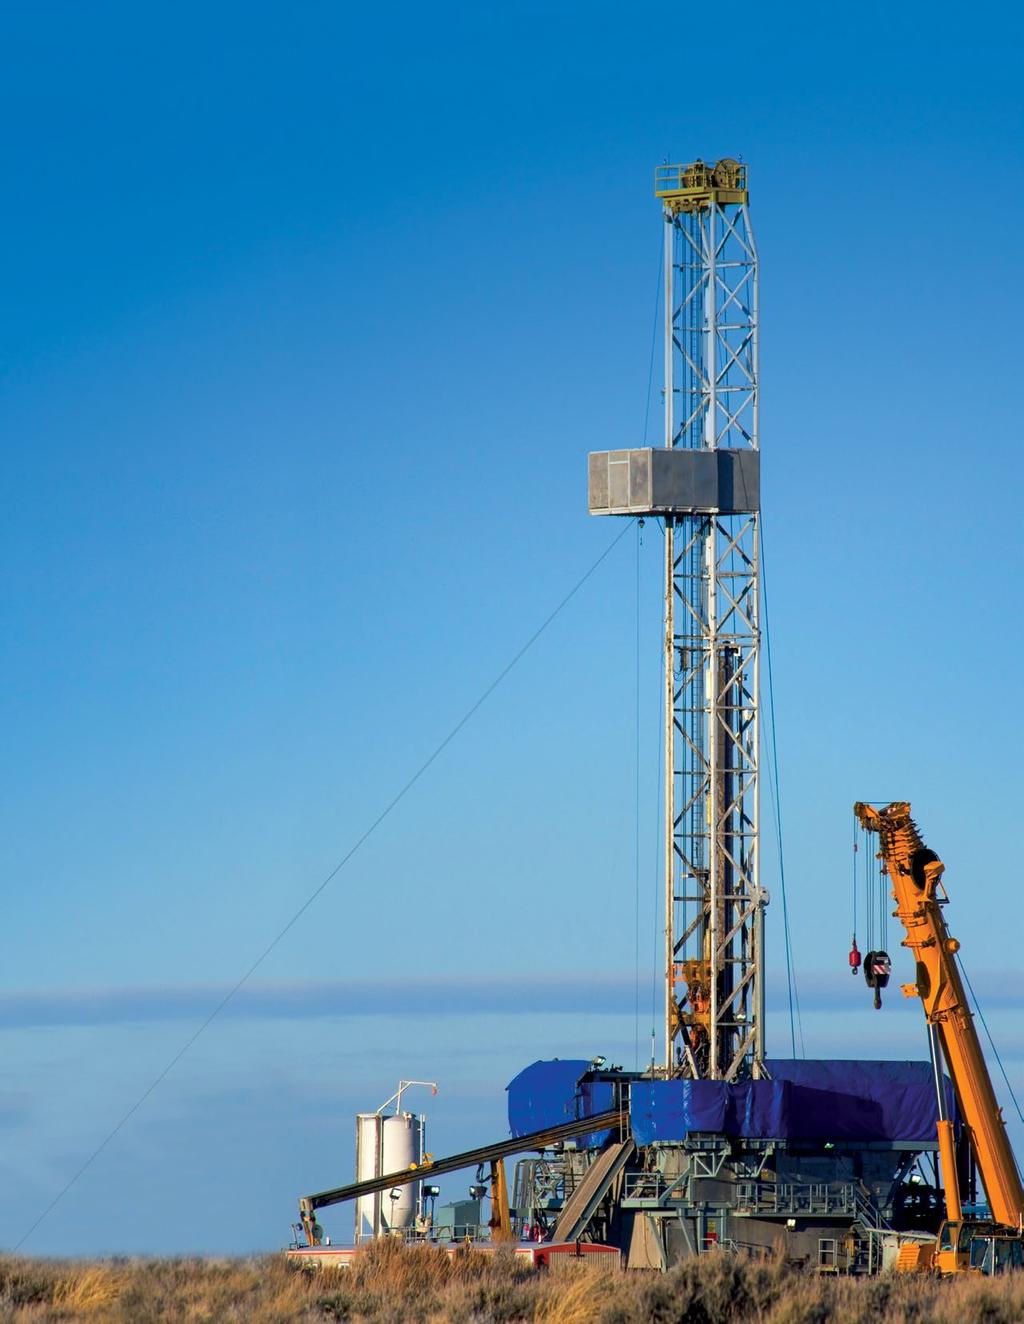 Unconventional Gas Extraction Technological advances in horizontal drilling and hydraulic fracturing (fracking) have led to profitable exploitation of natural gas from shale formations across the